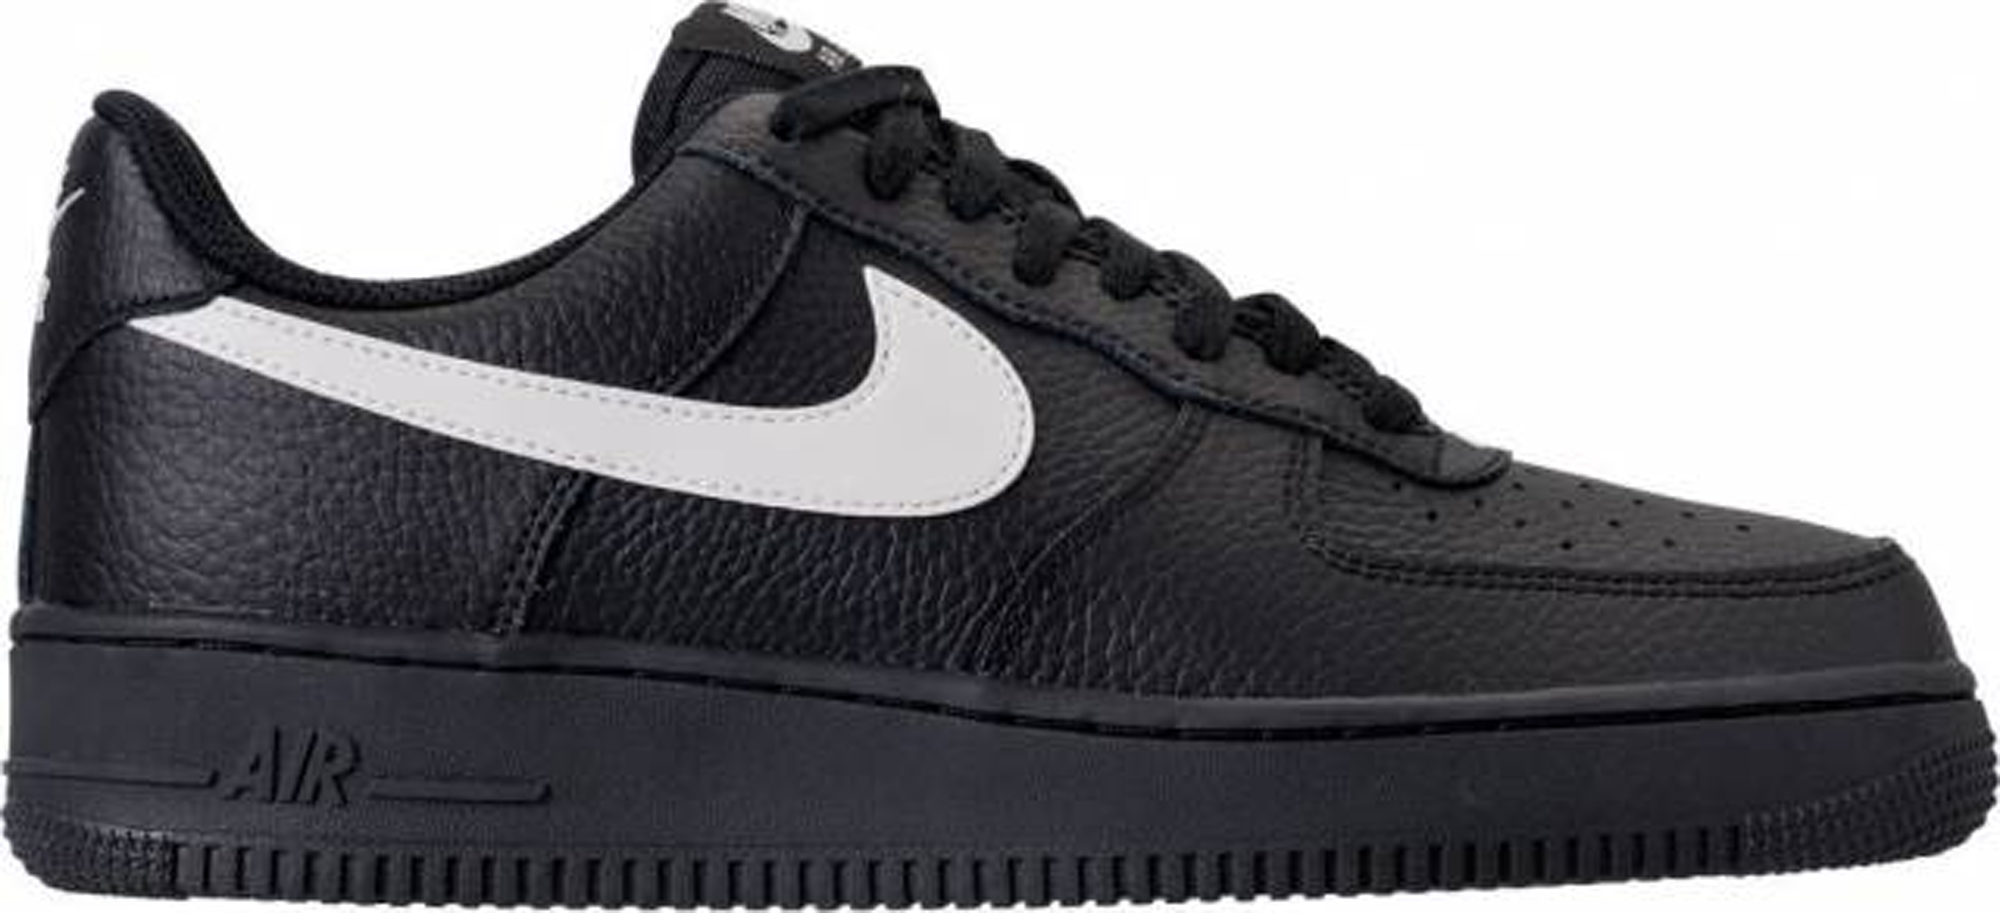 white air force ones with black trim